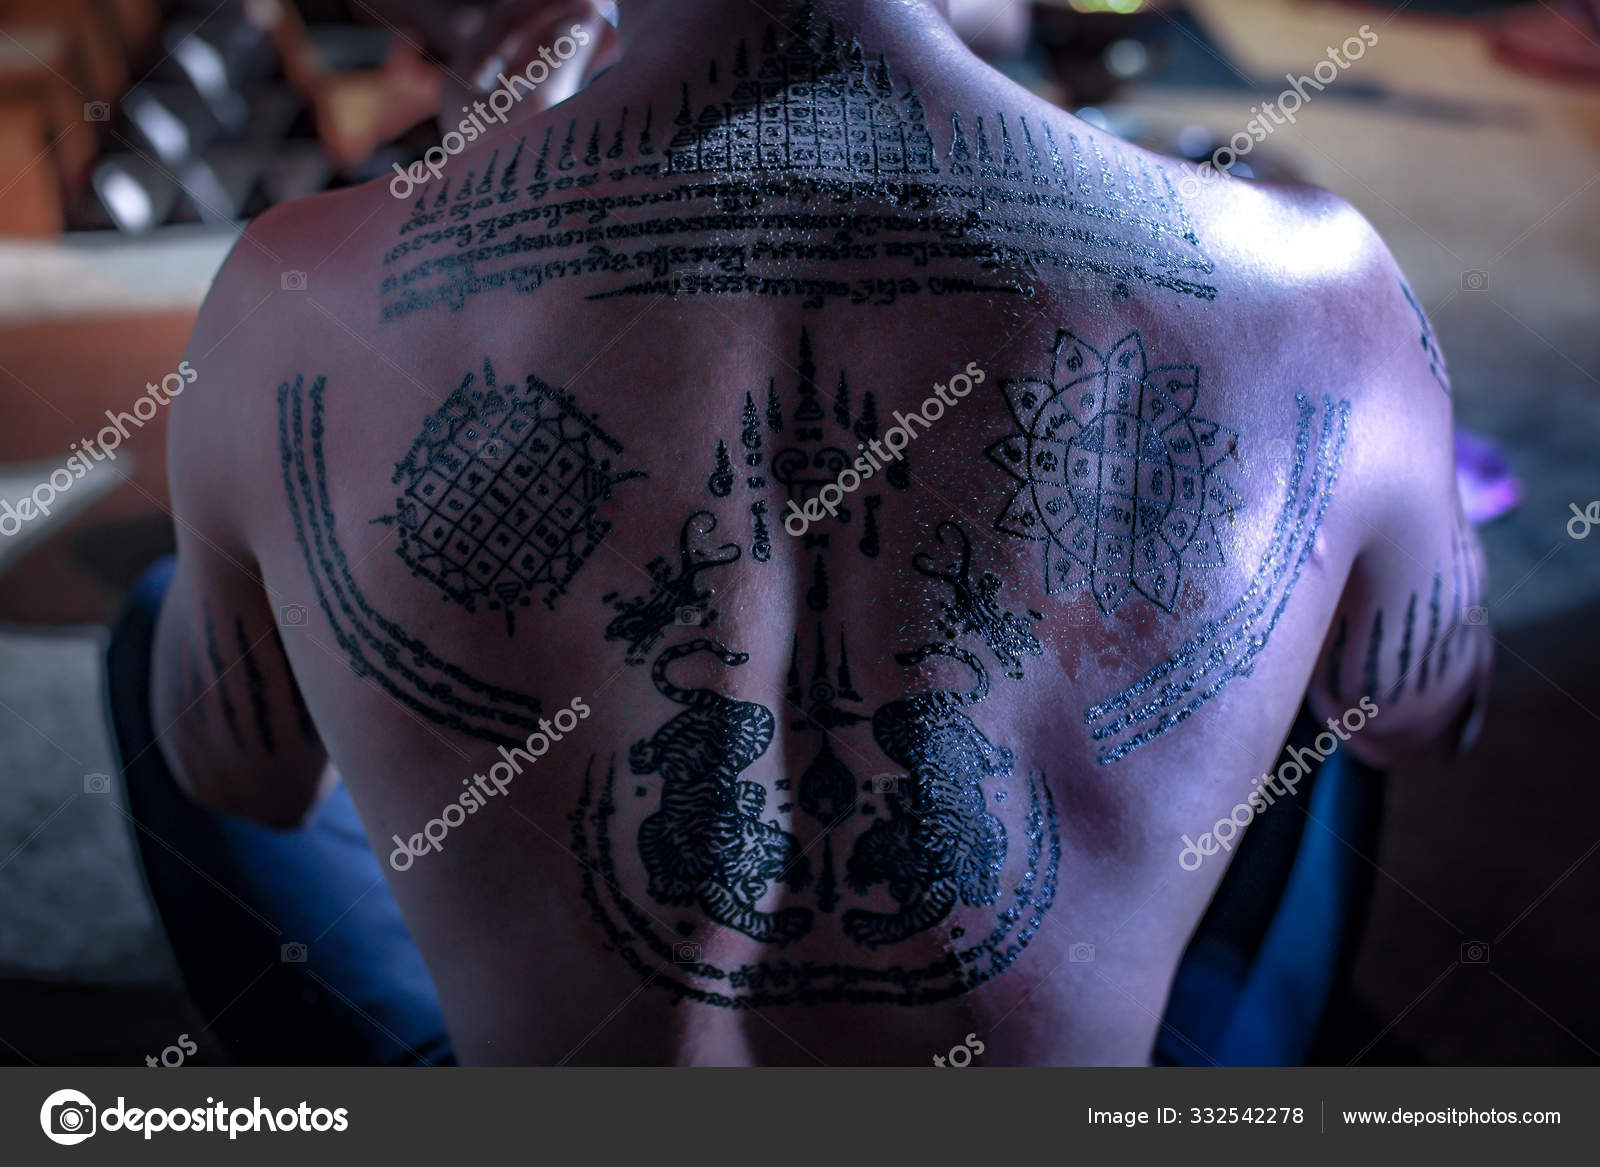 Share 88+ about black magic tattoo latest .vn